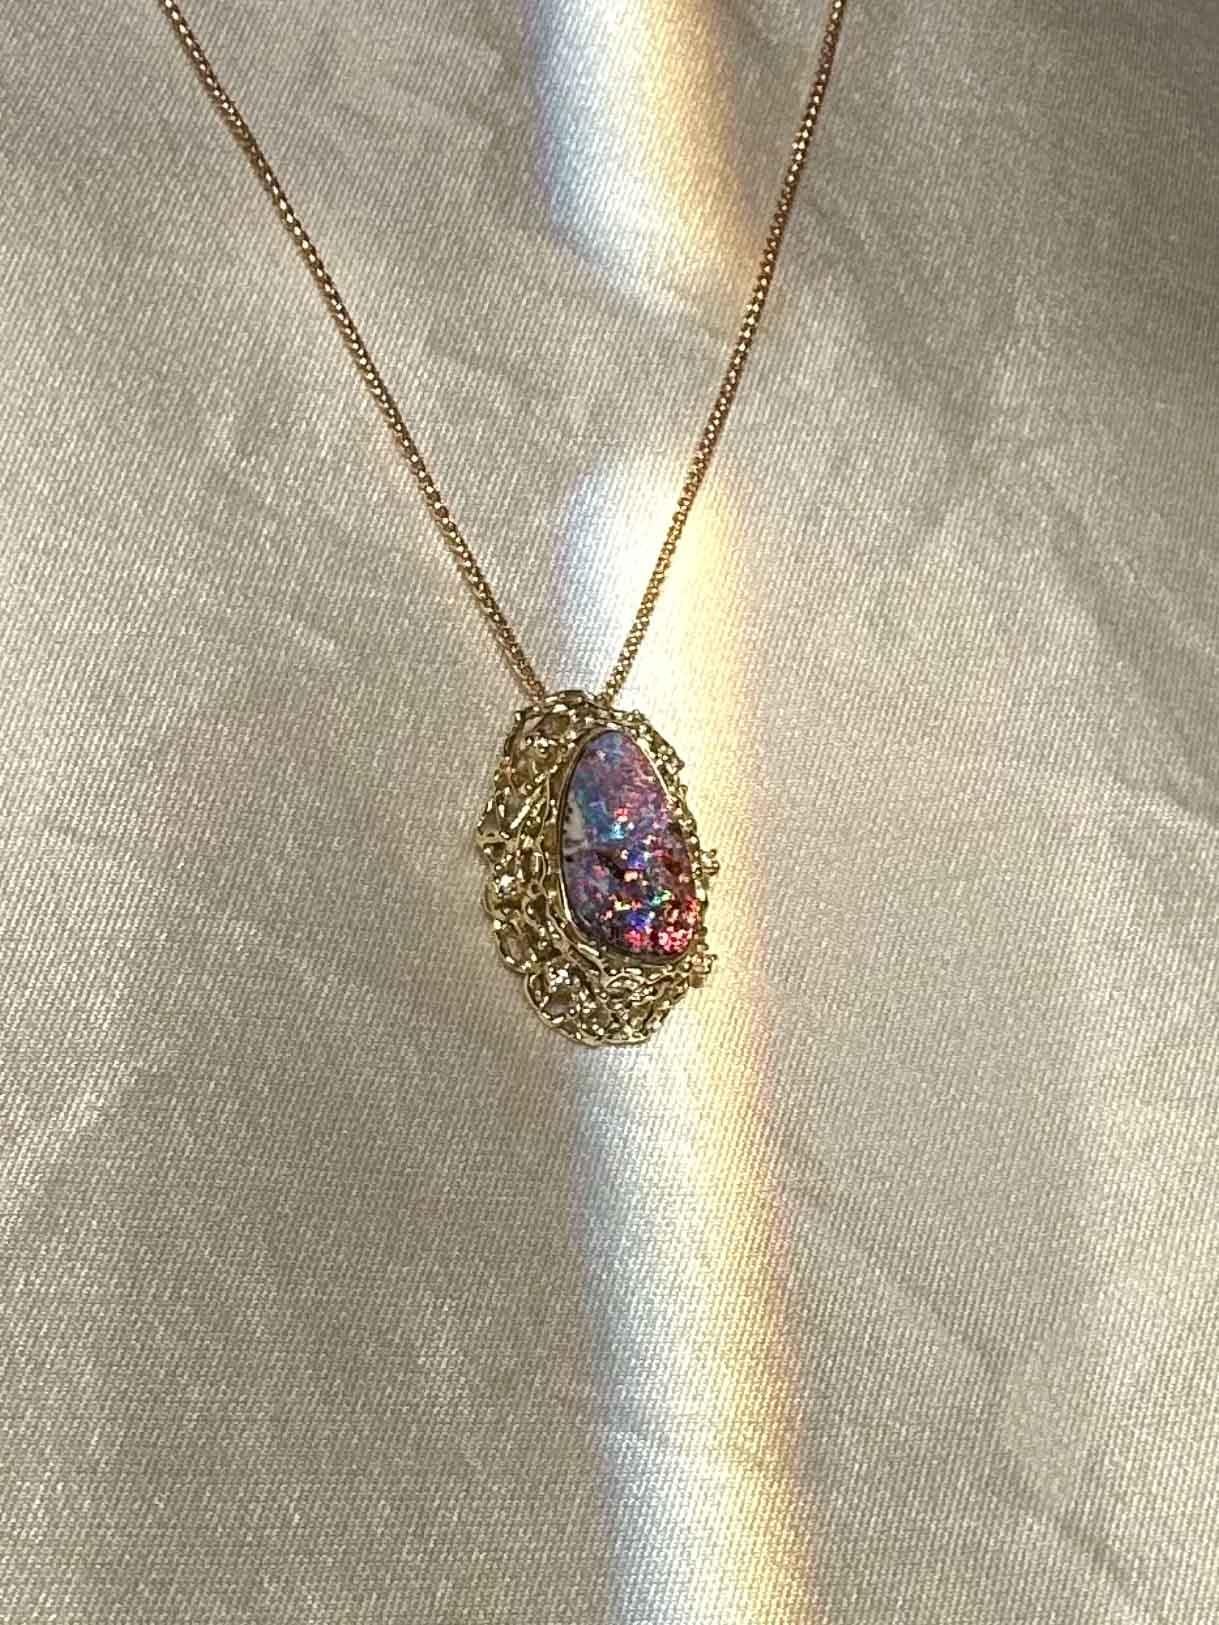 Australian Boulder Opal and Diamond Pendant with Chain 18K Gold 10.38g V1125 For Sale 3